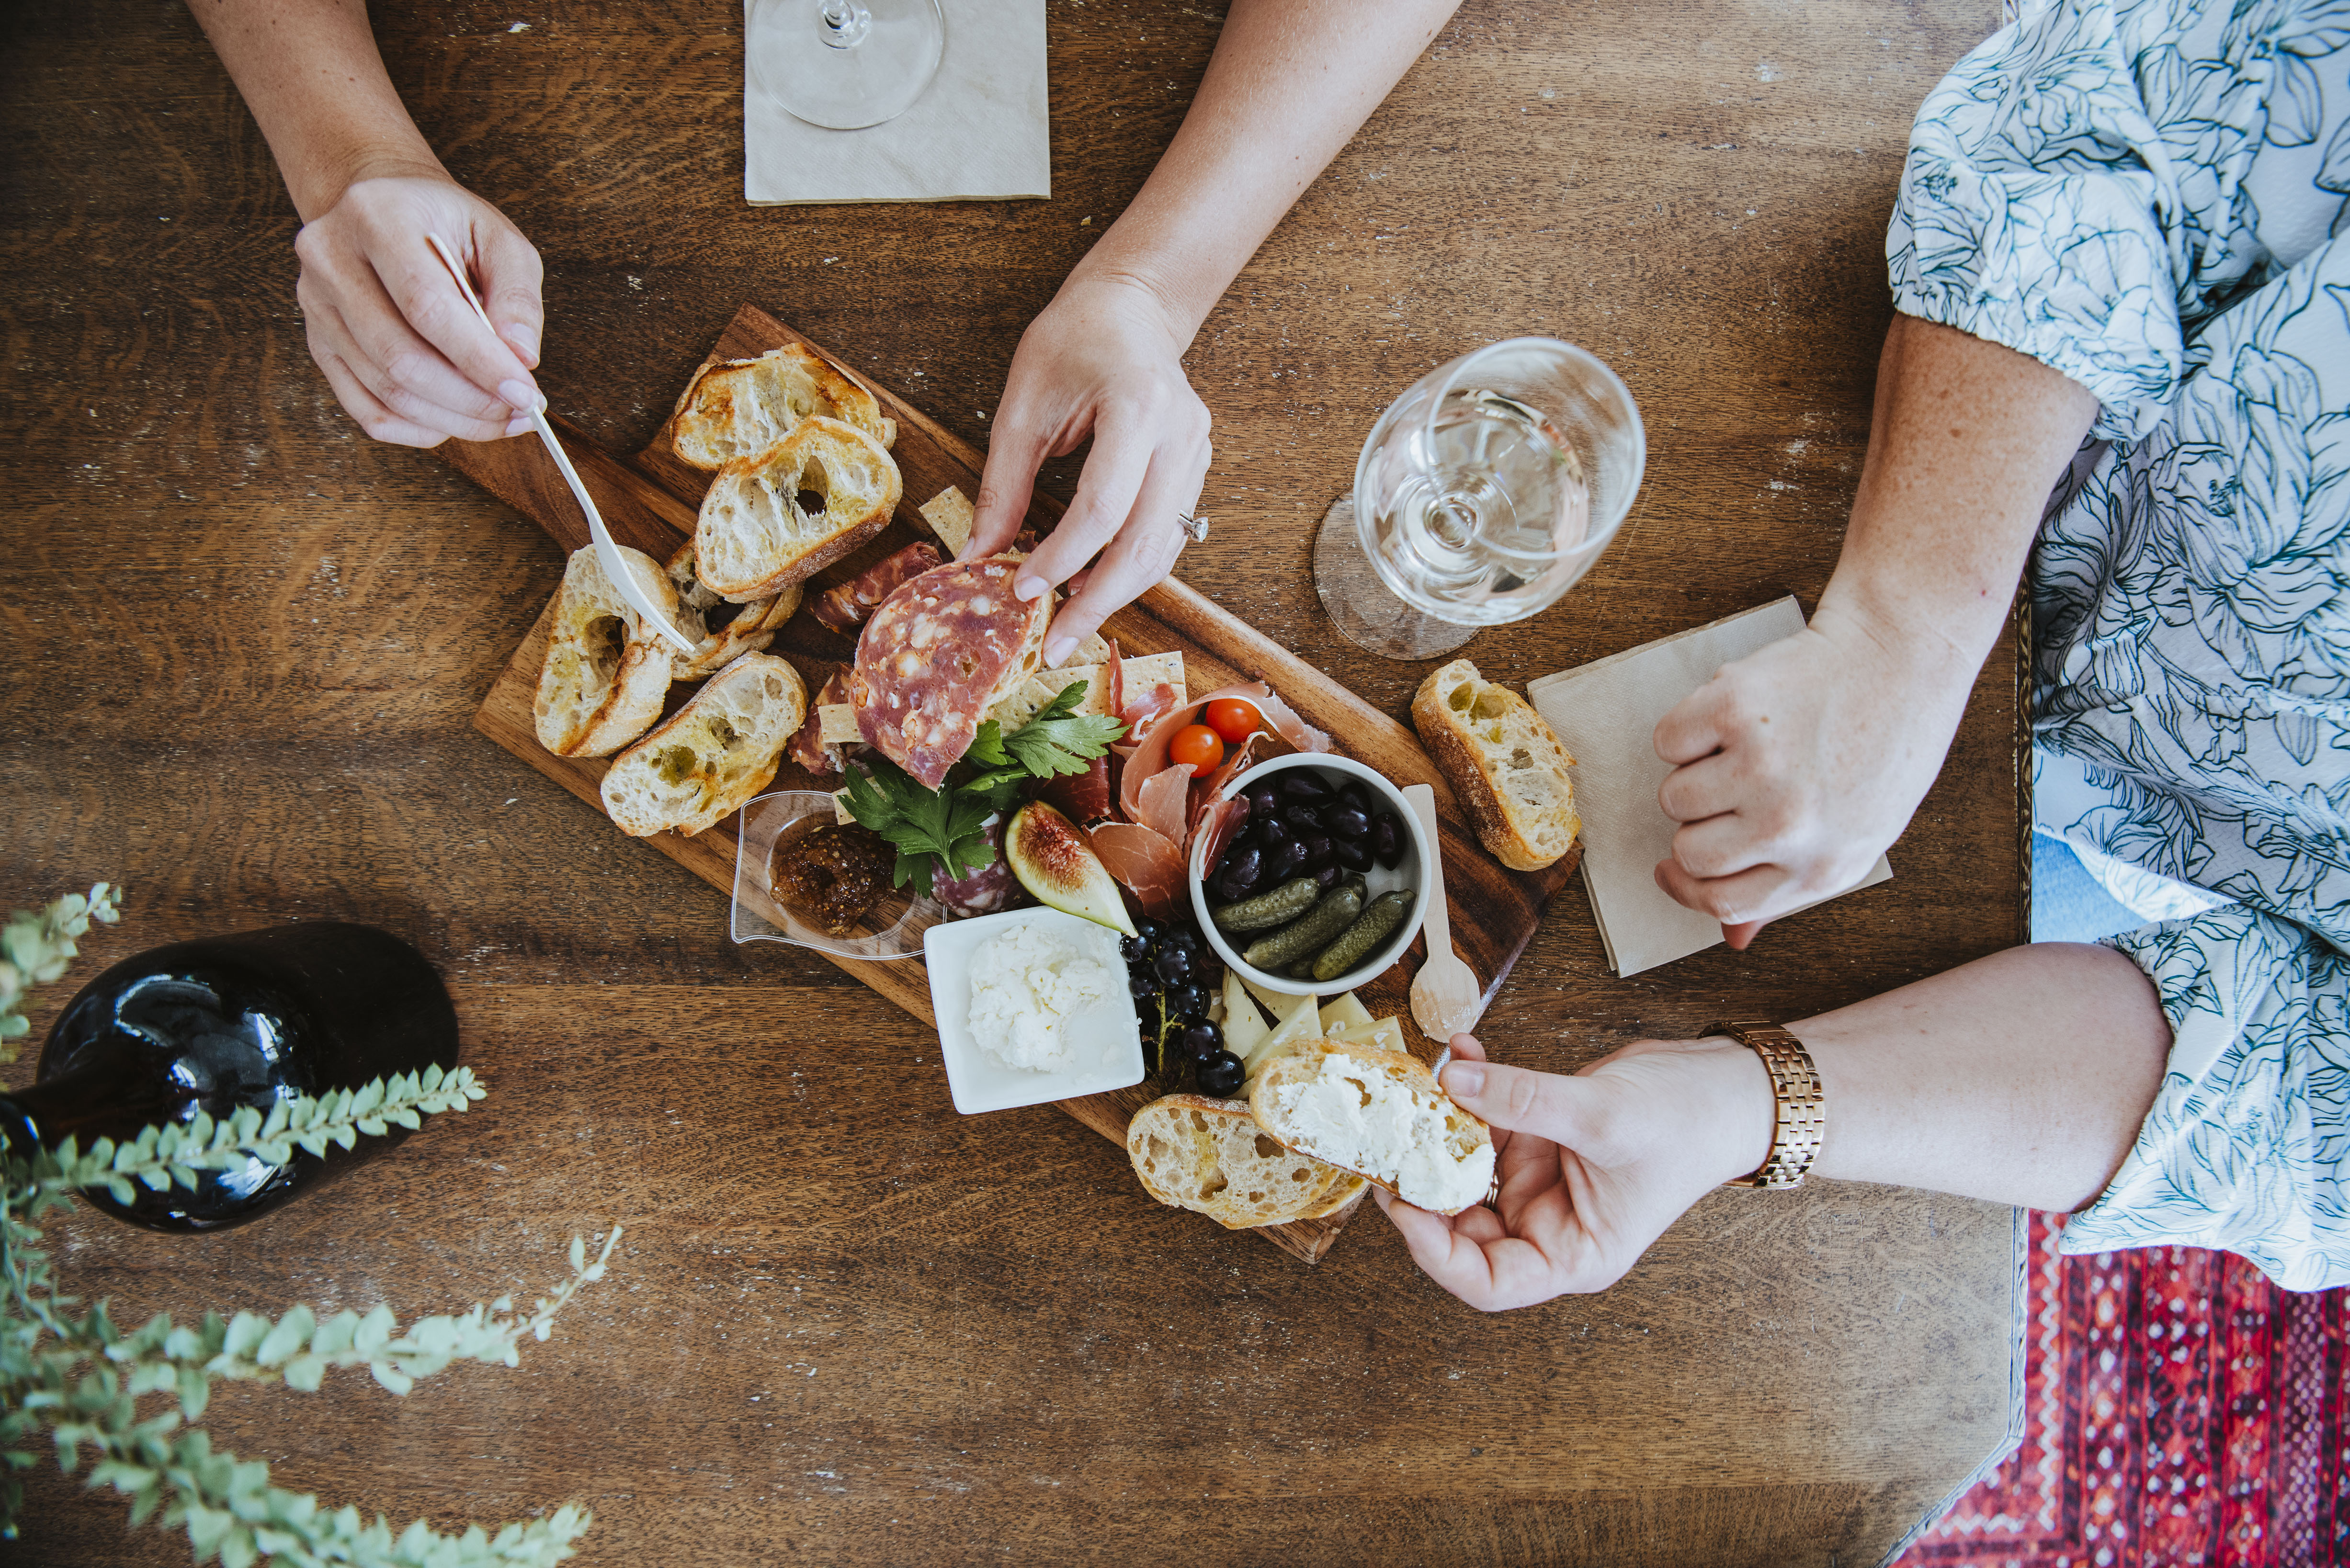 Charcuterie platter on table with 2 people's hands and arms 